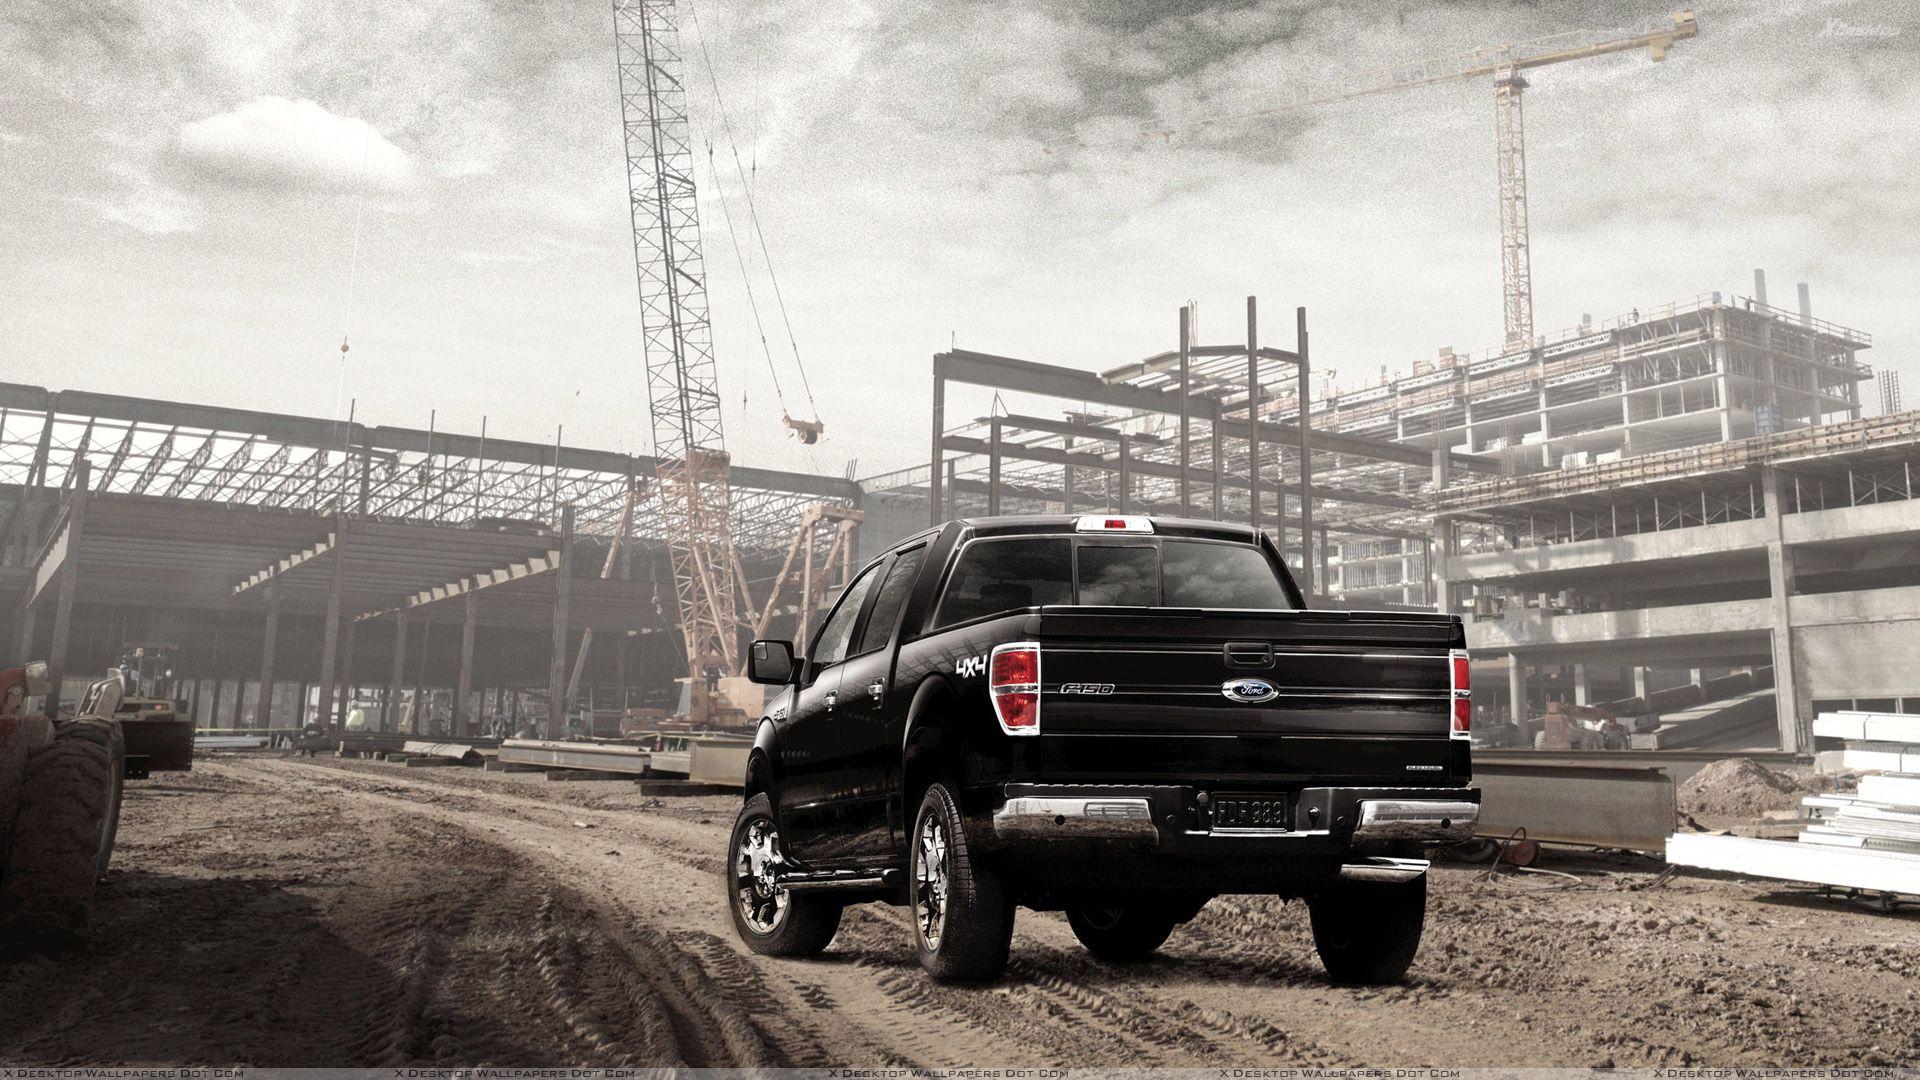 Ford F 150 Wallpaper, Photo & Image In HD